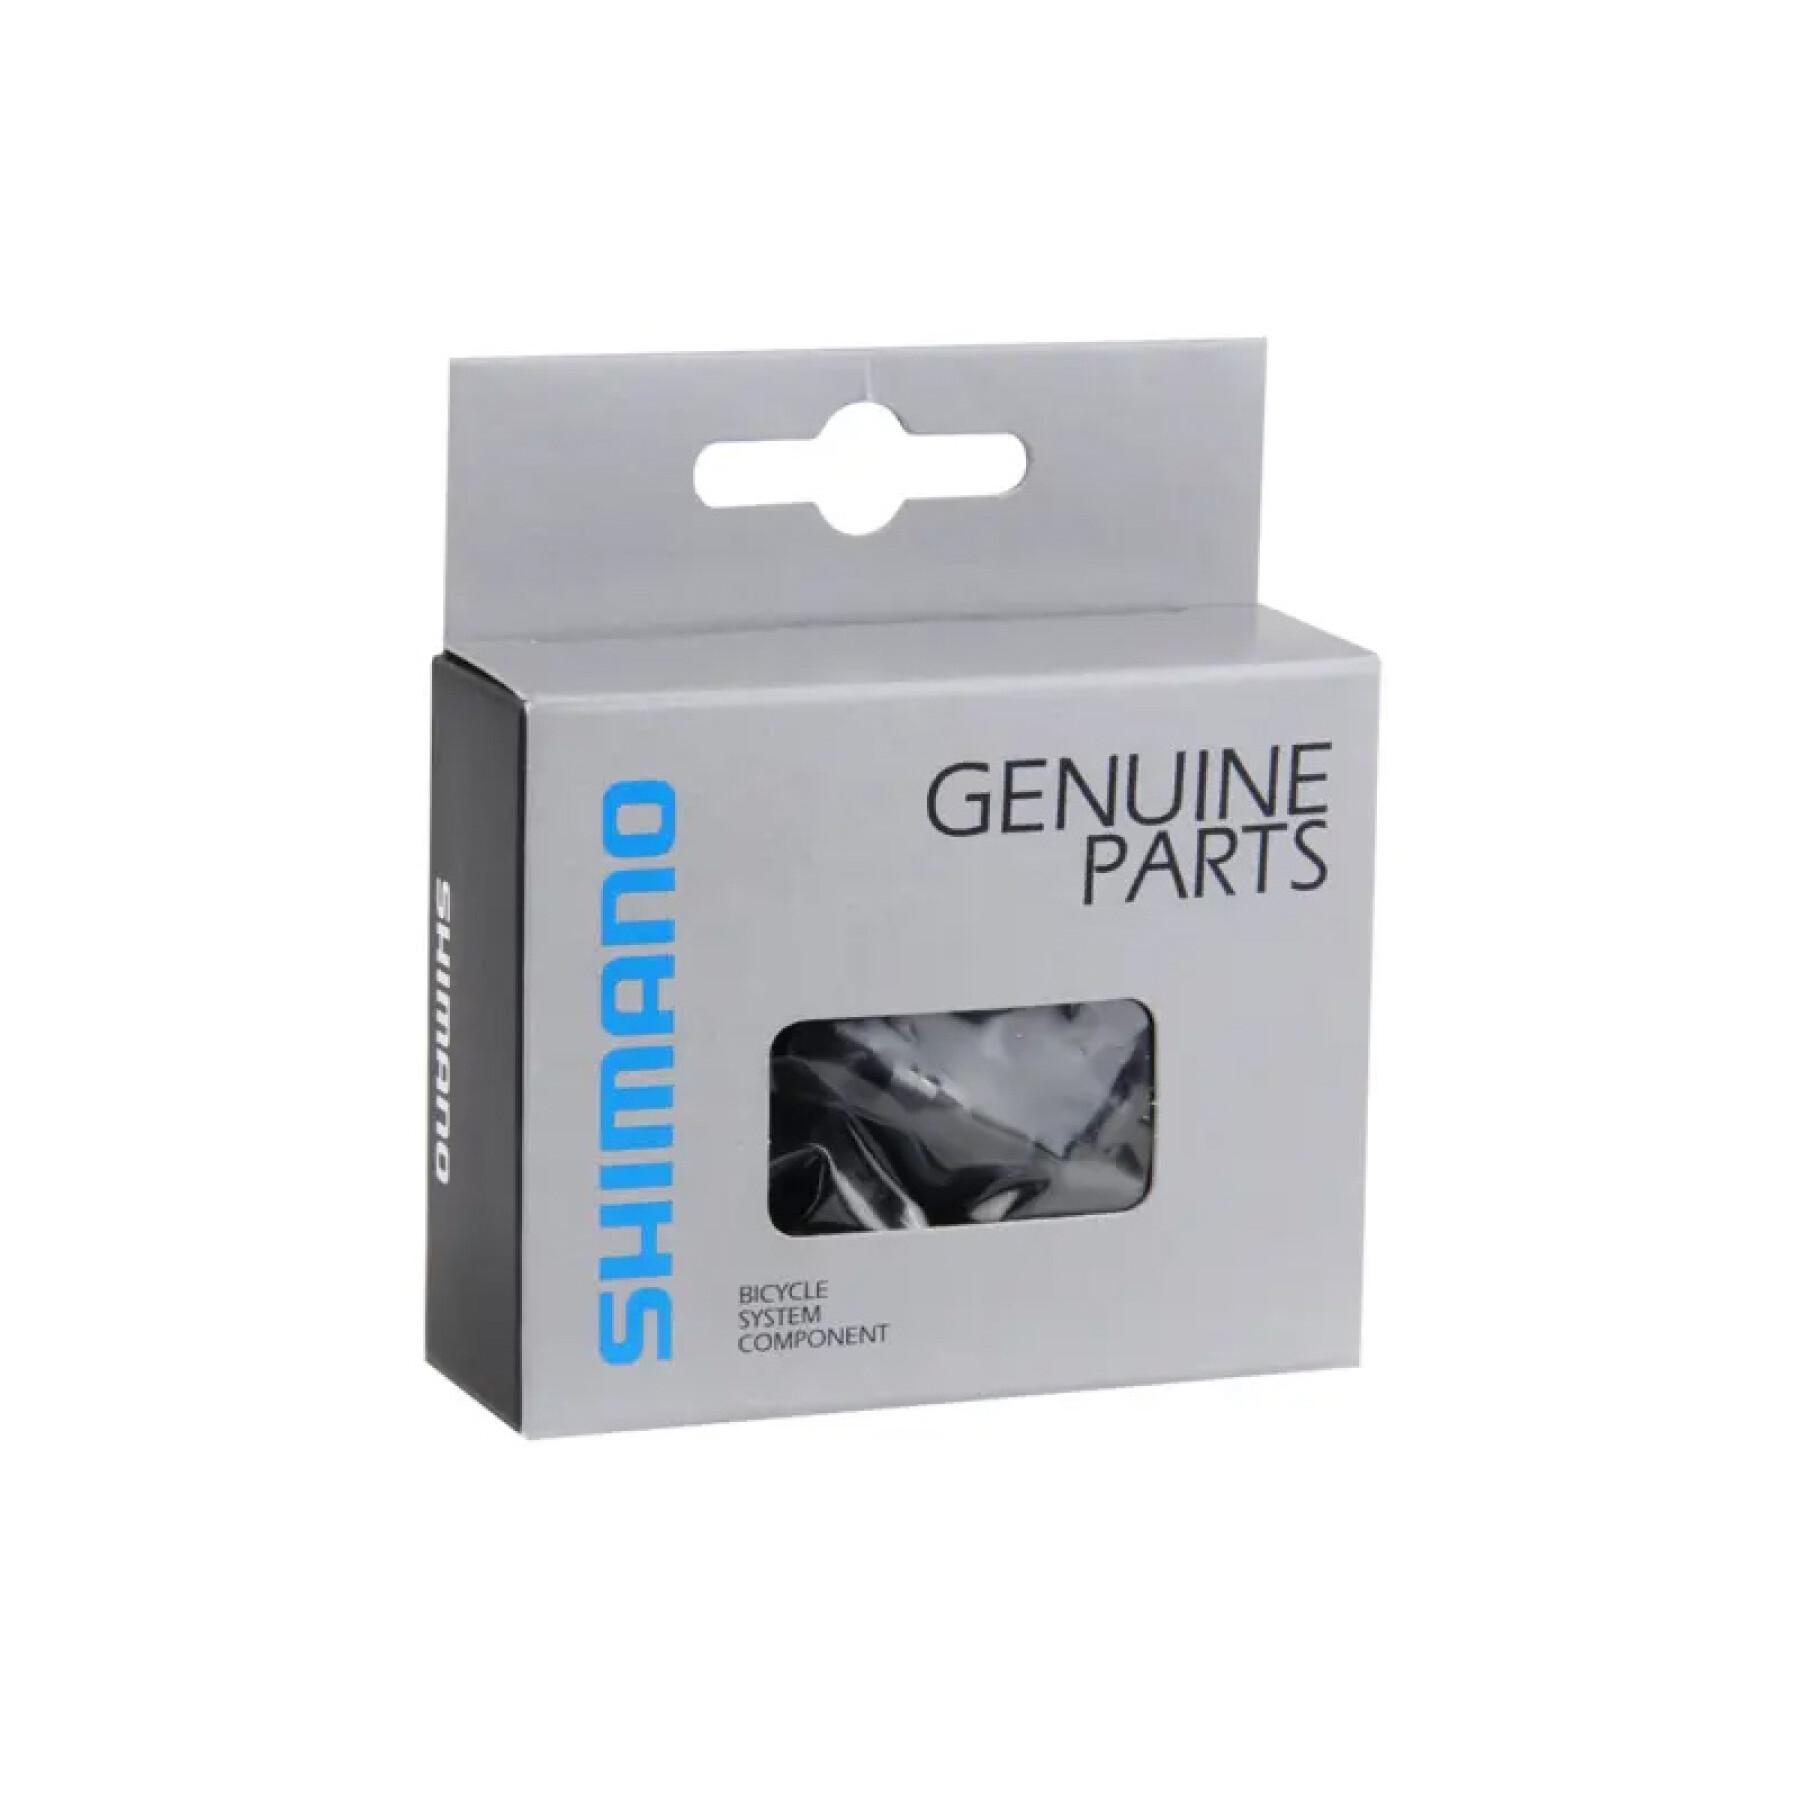 Pack of 100 rear derailleur cable housings Shimano SIS SP-40